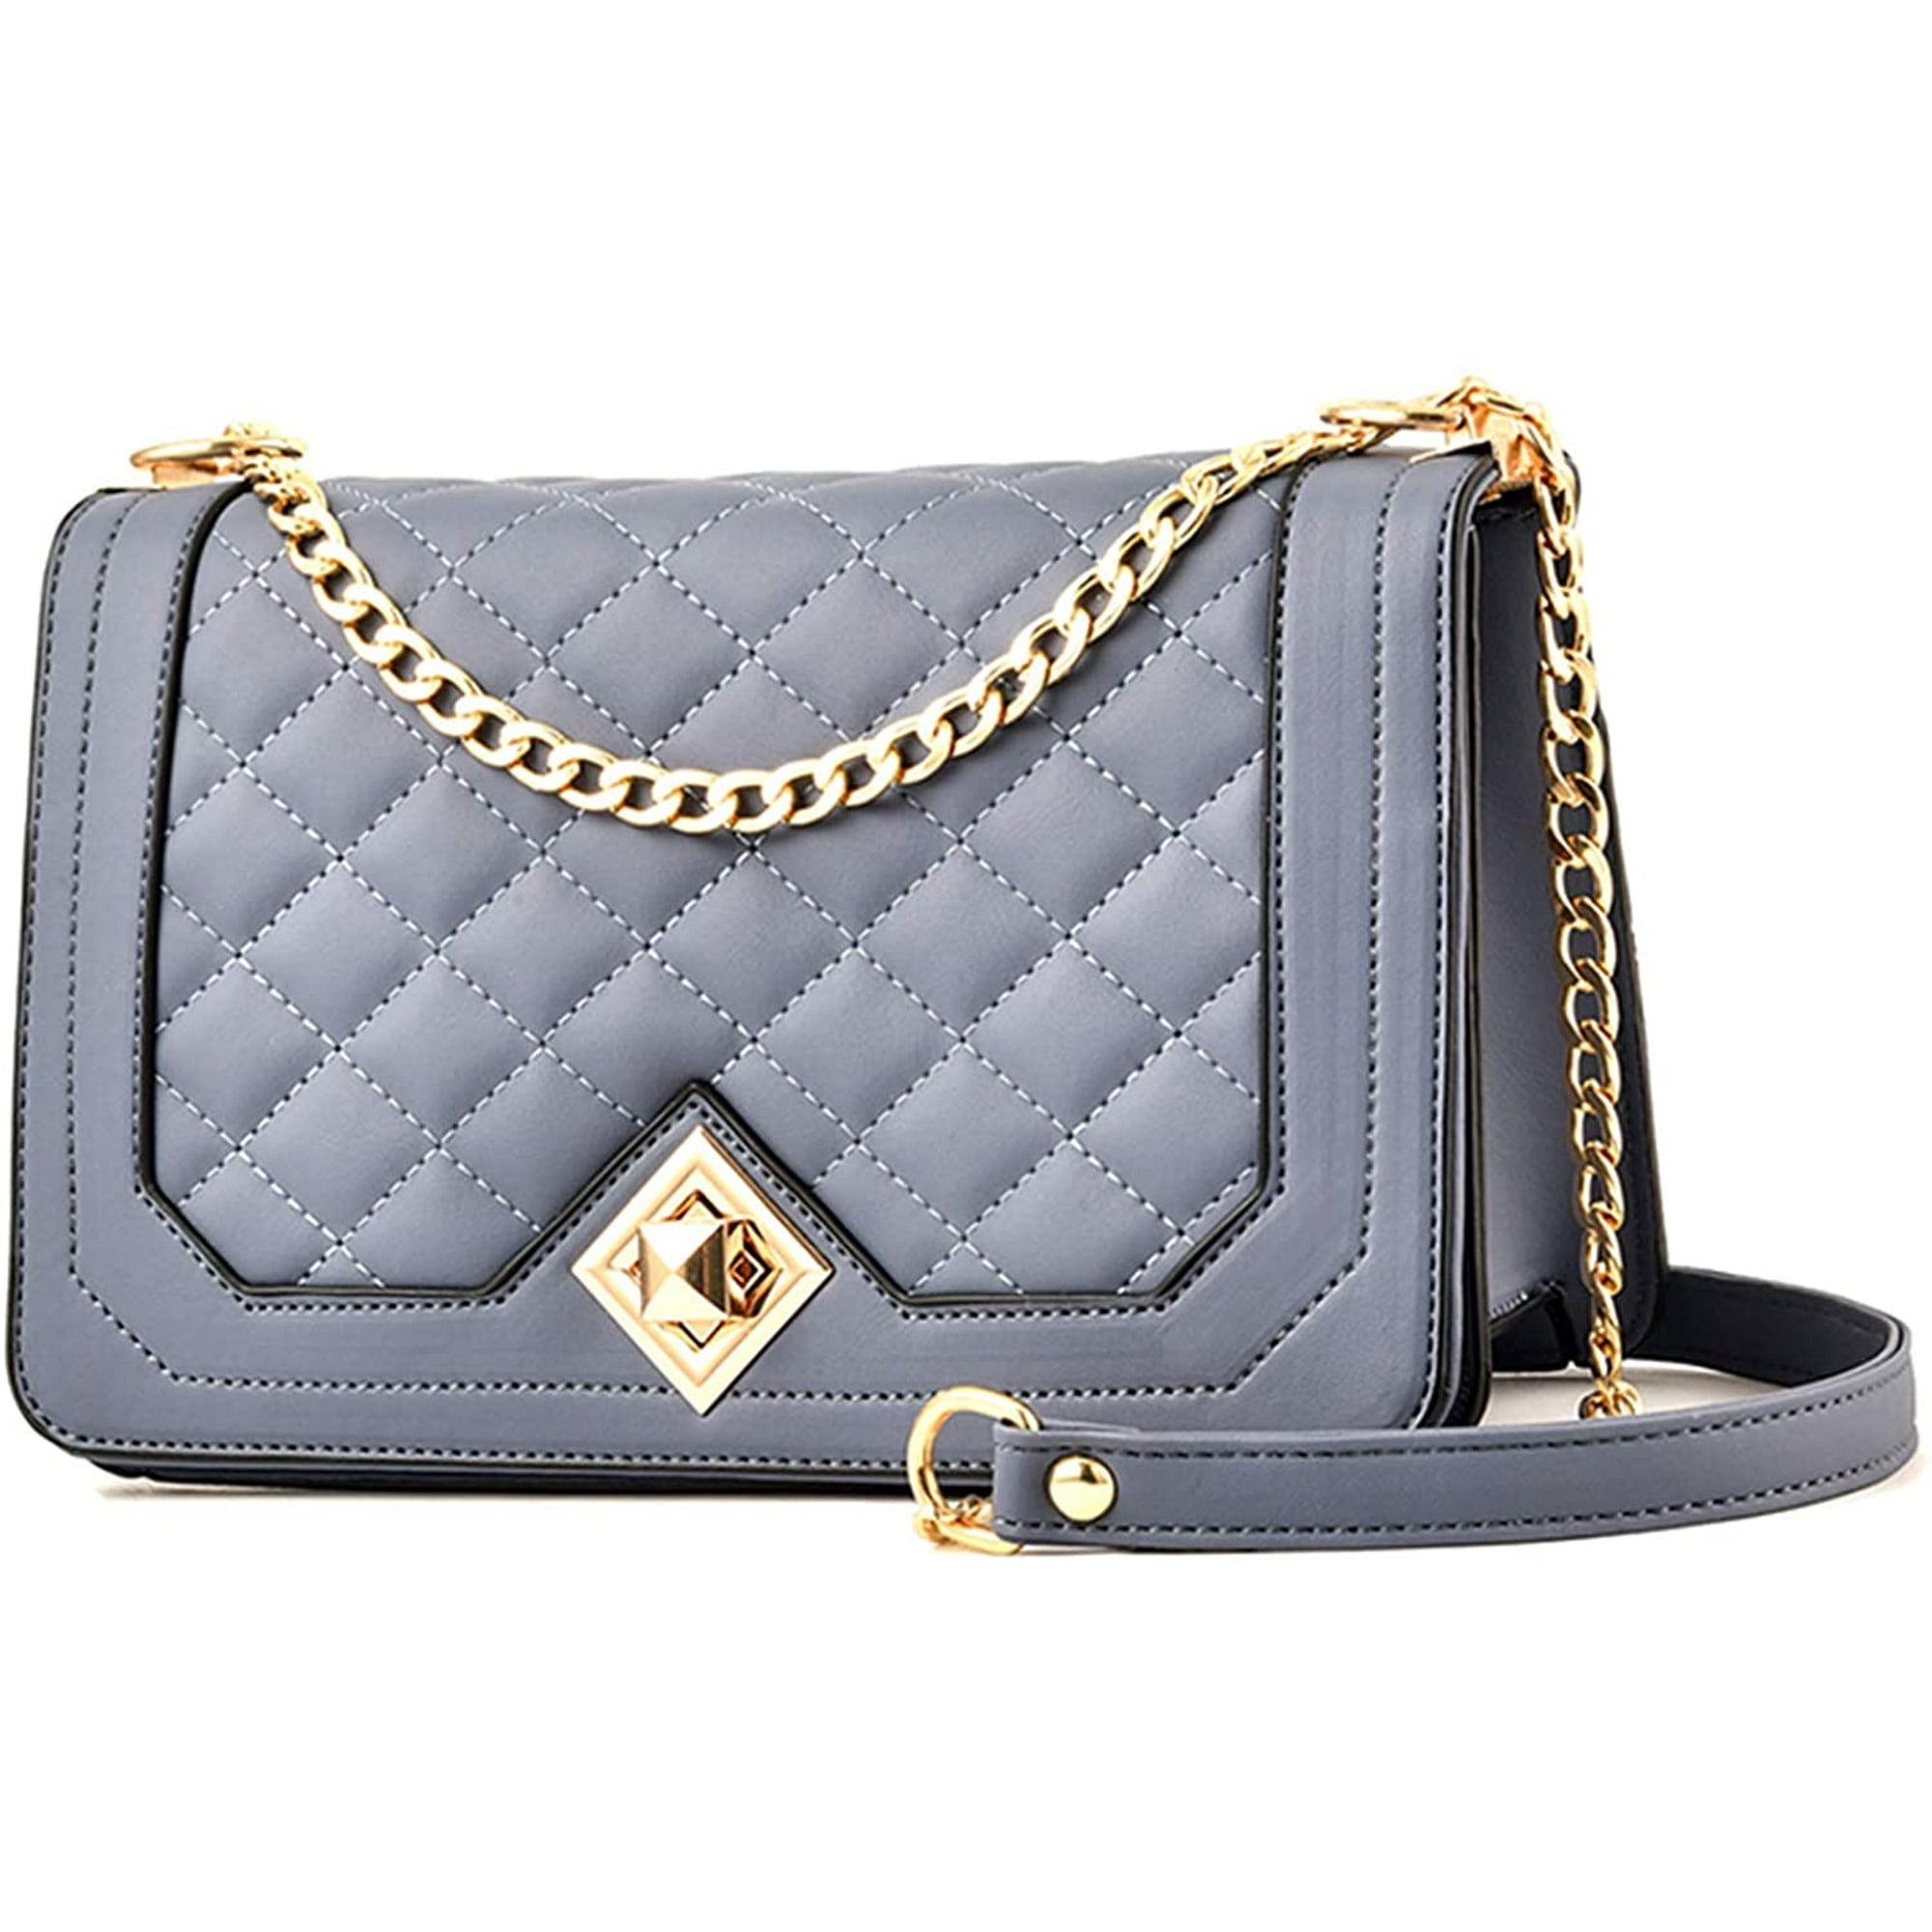 Crossbody Bags for Women Small Handbags PU Leather Shoulder Bag Ladies Purse  Evening Bag Quilted Satchels with Chain Strap 